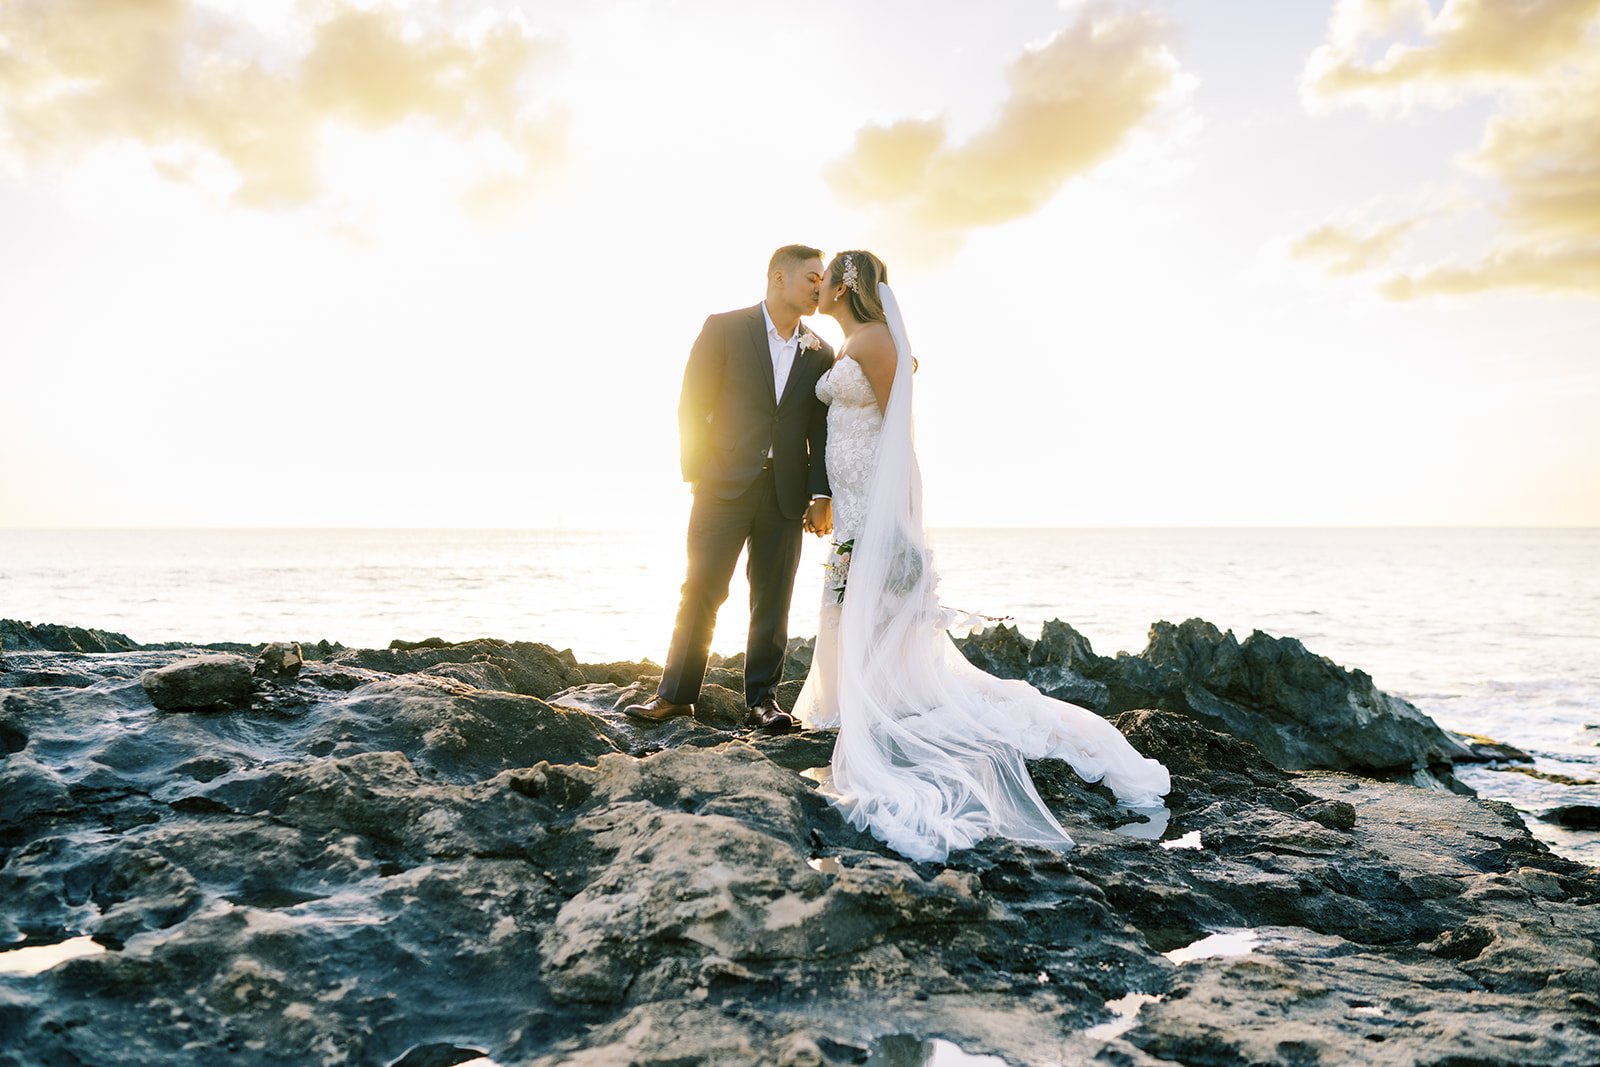 You, your other half, and a Hawaiian sunset &ndash; the perfect trifecta of magic. Let the golden hues of the Hawaiian sky paint the backdrop to your love story as you say 'I do' in paradise. And let our concierge help create the perfect elopement. 
